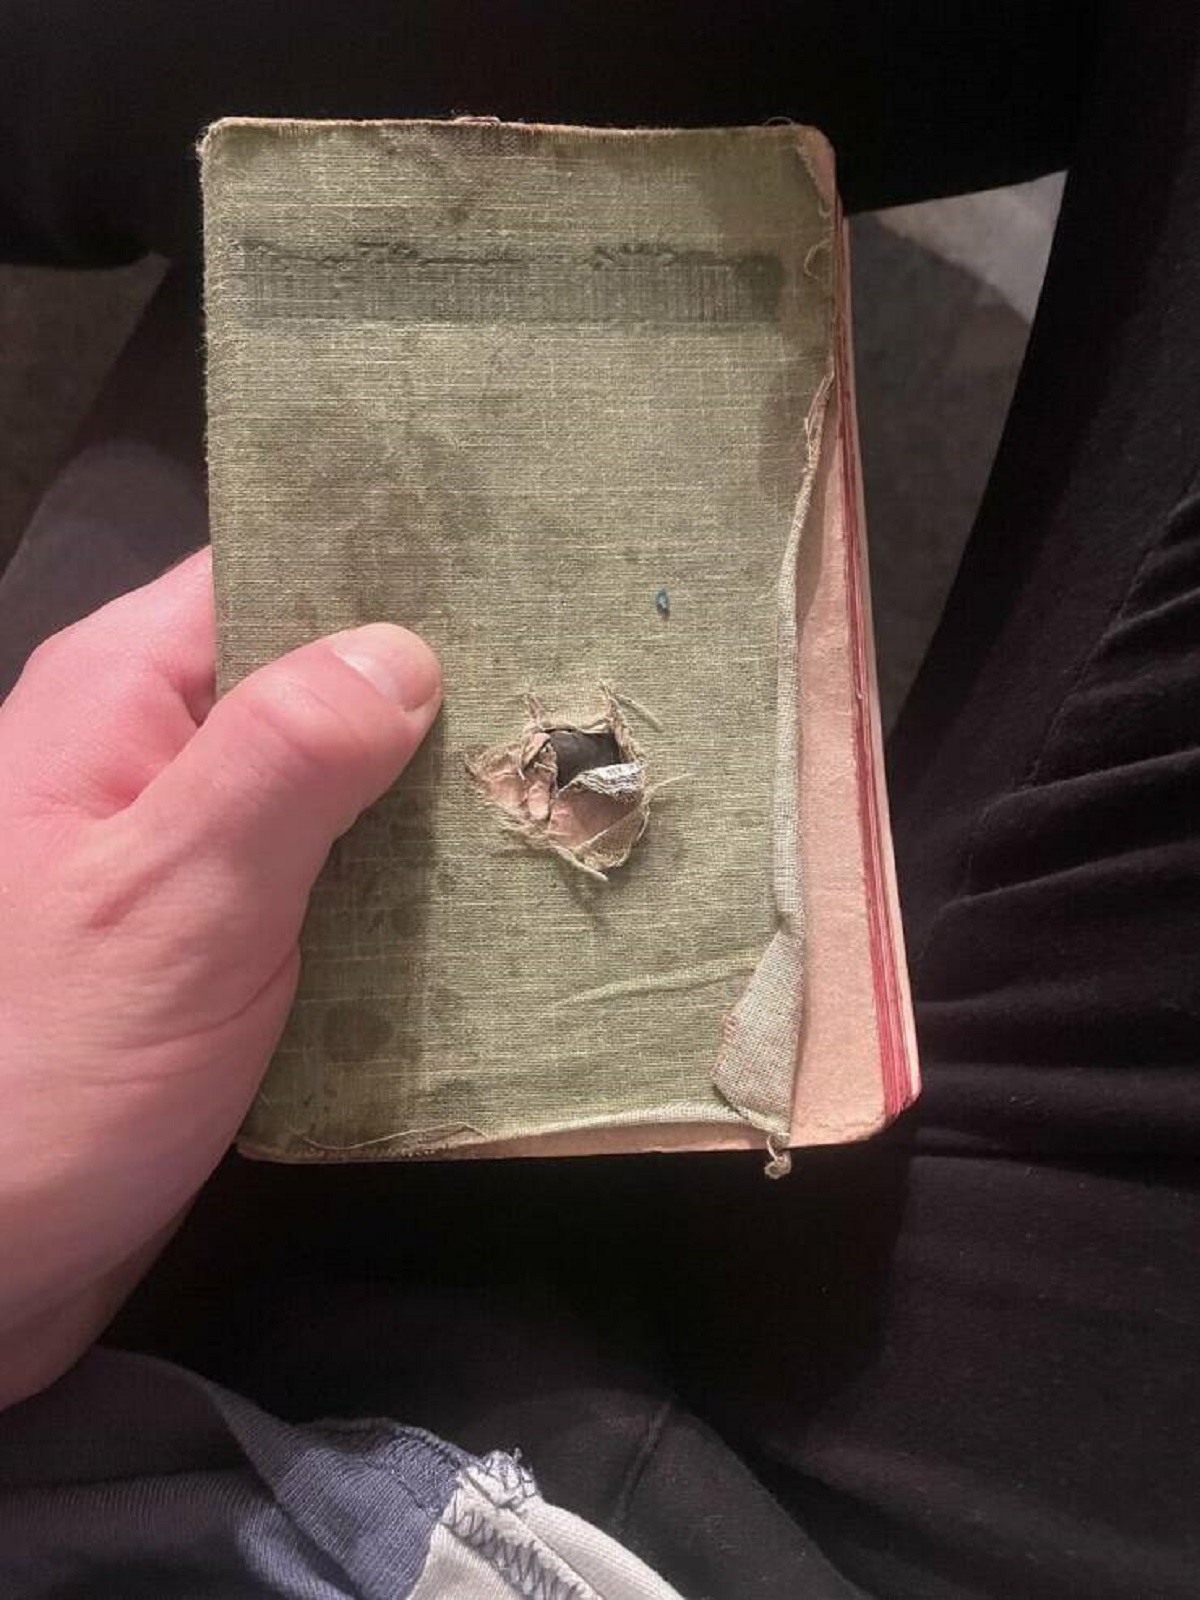 "The bible that saved my great-great grandfather in WW1"